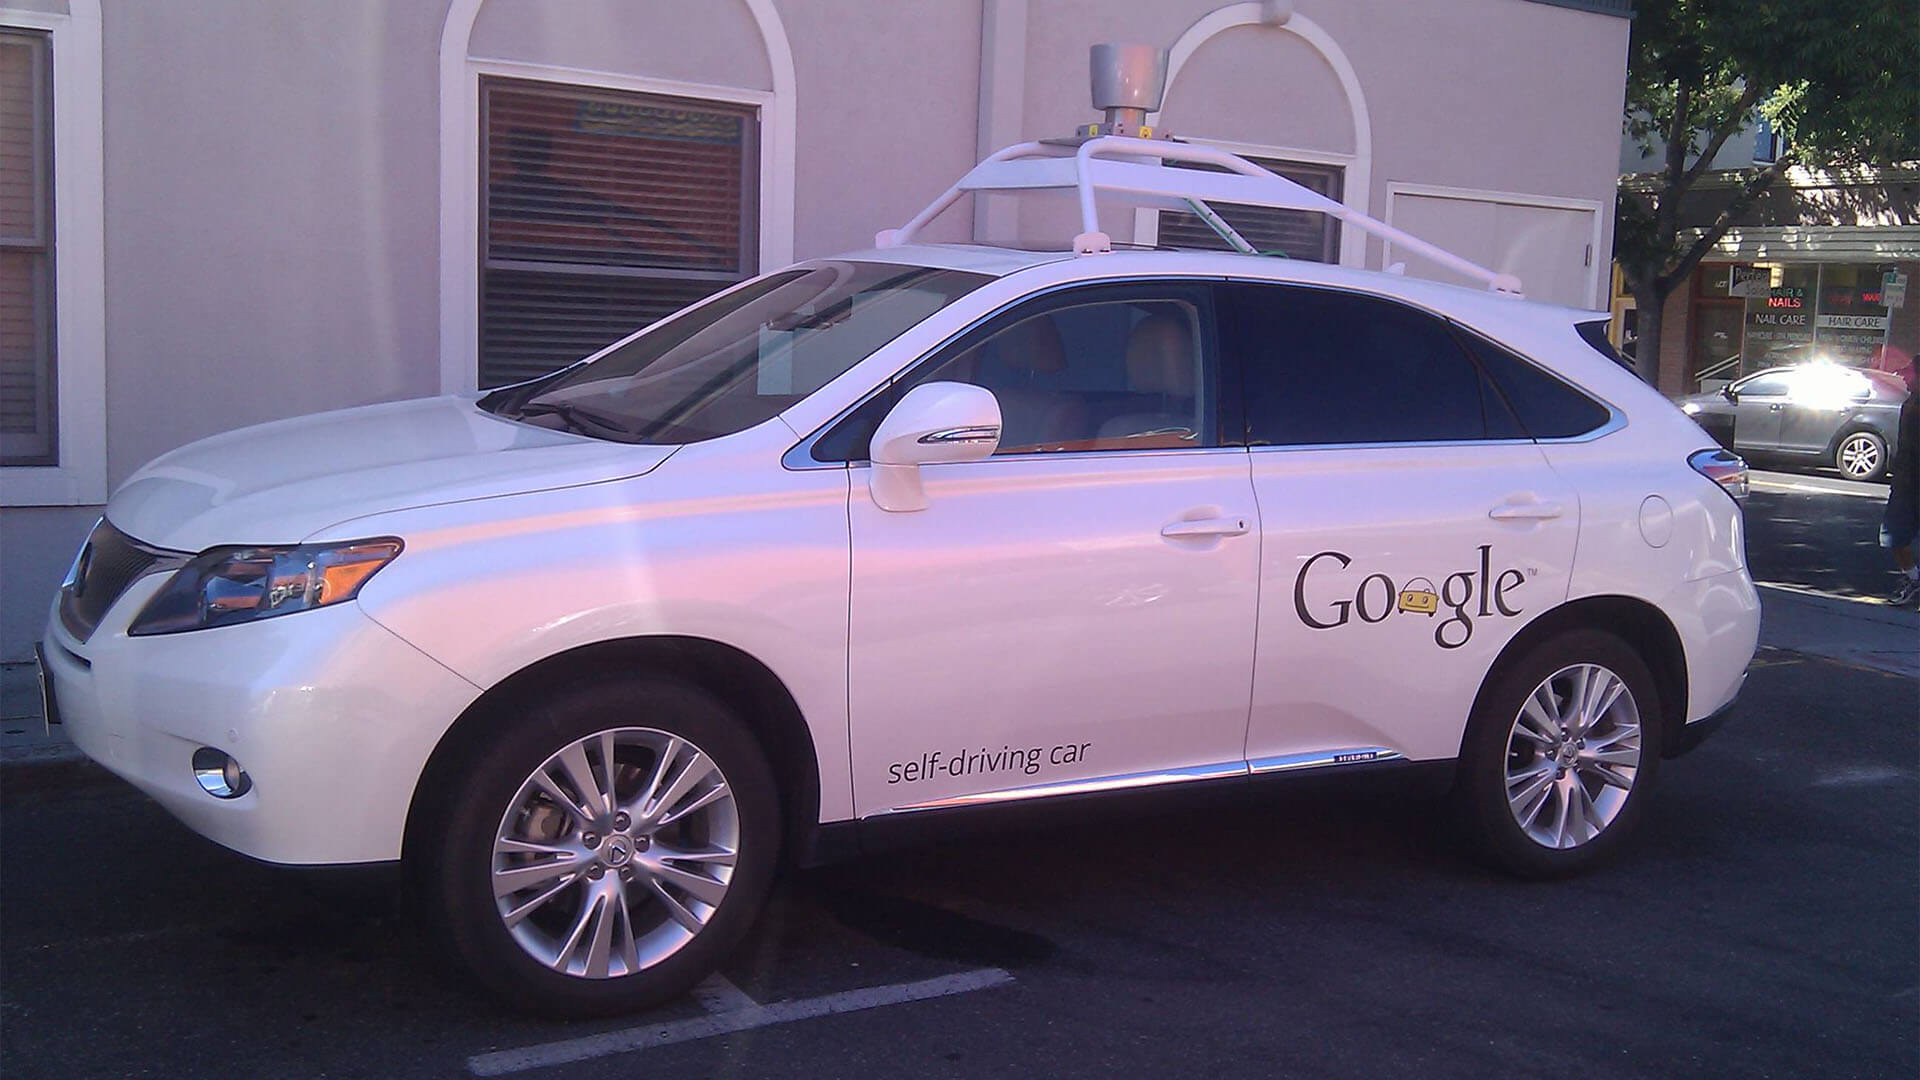 Safety of Driverless Cars | Autonomous Vehicles